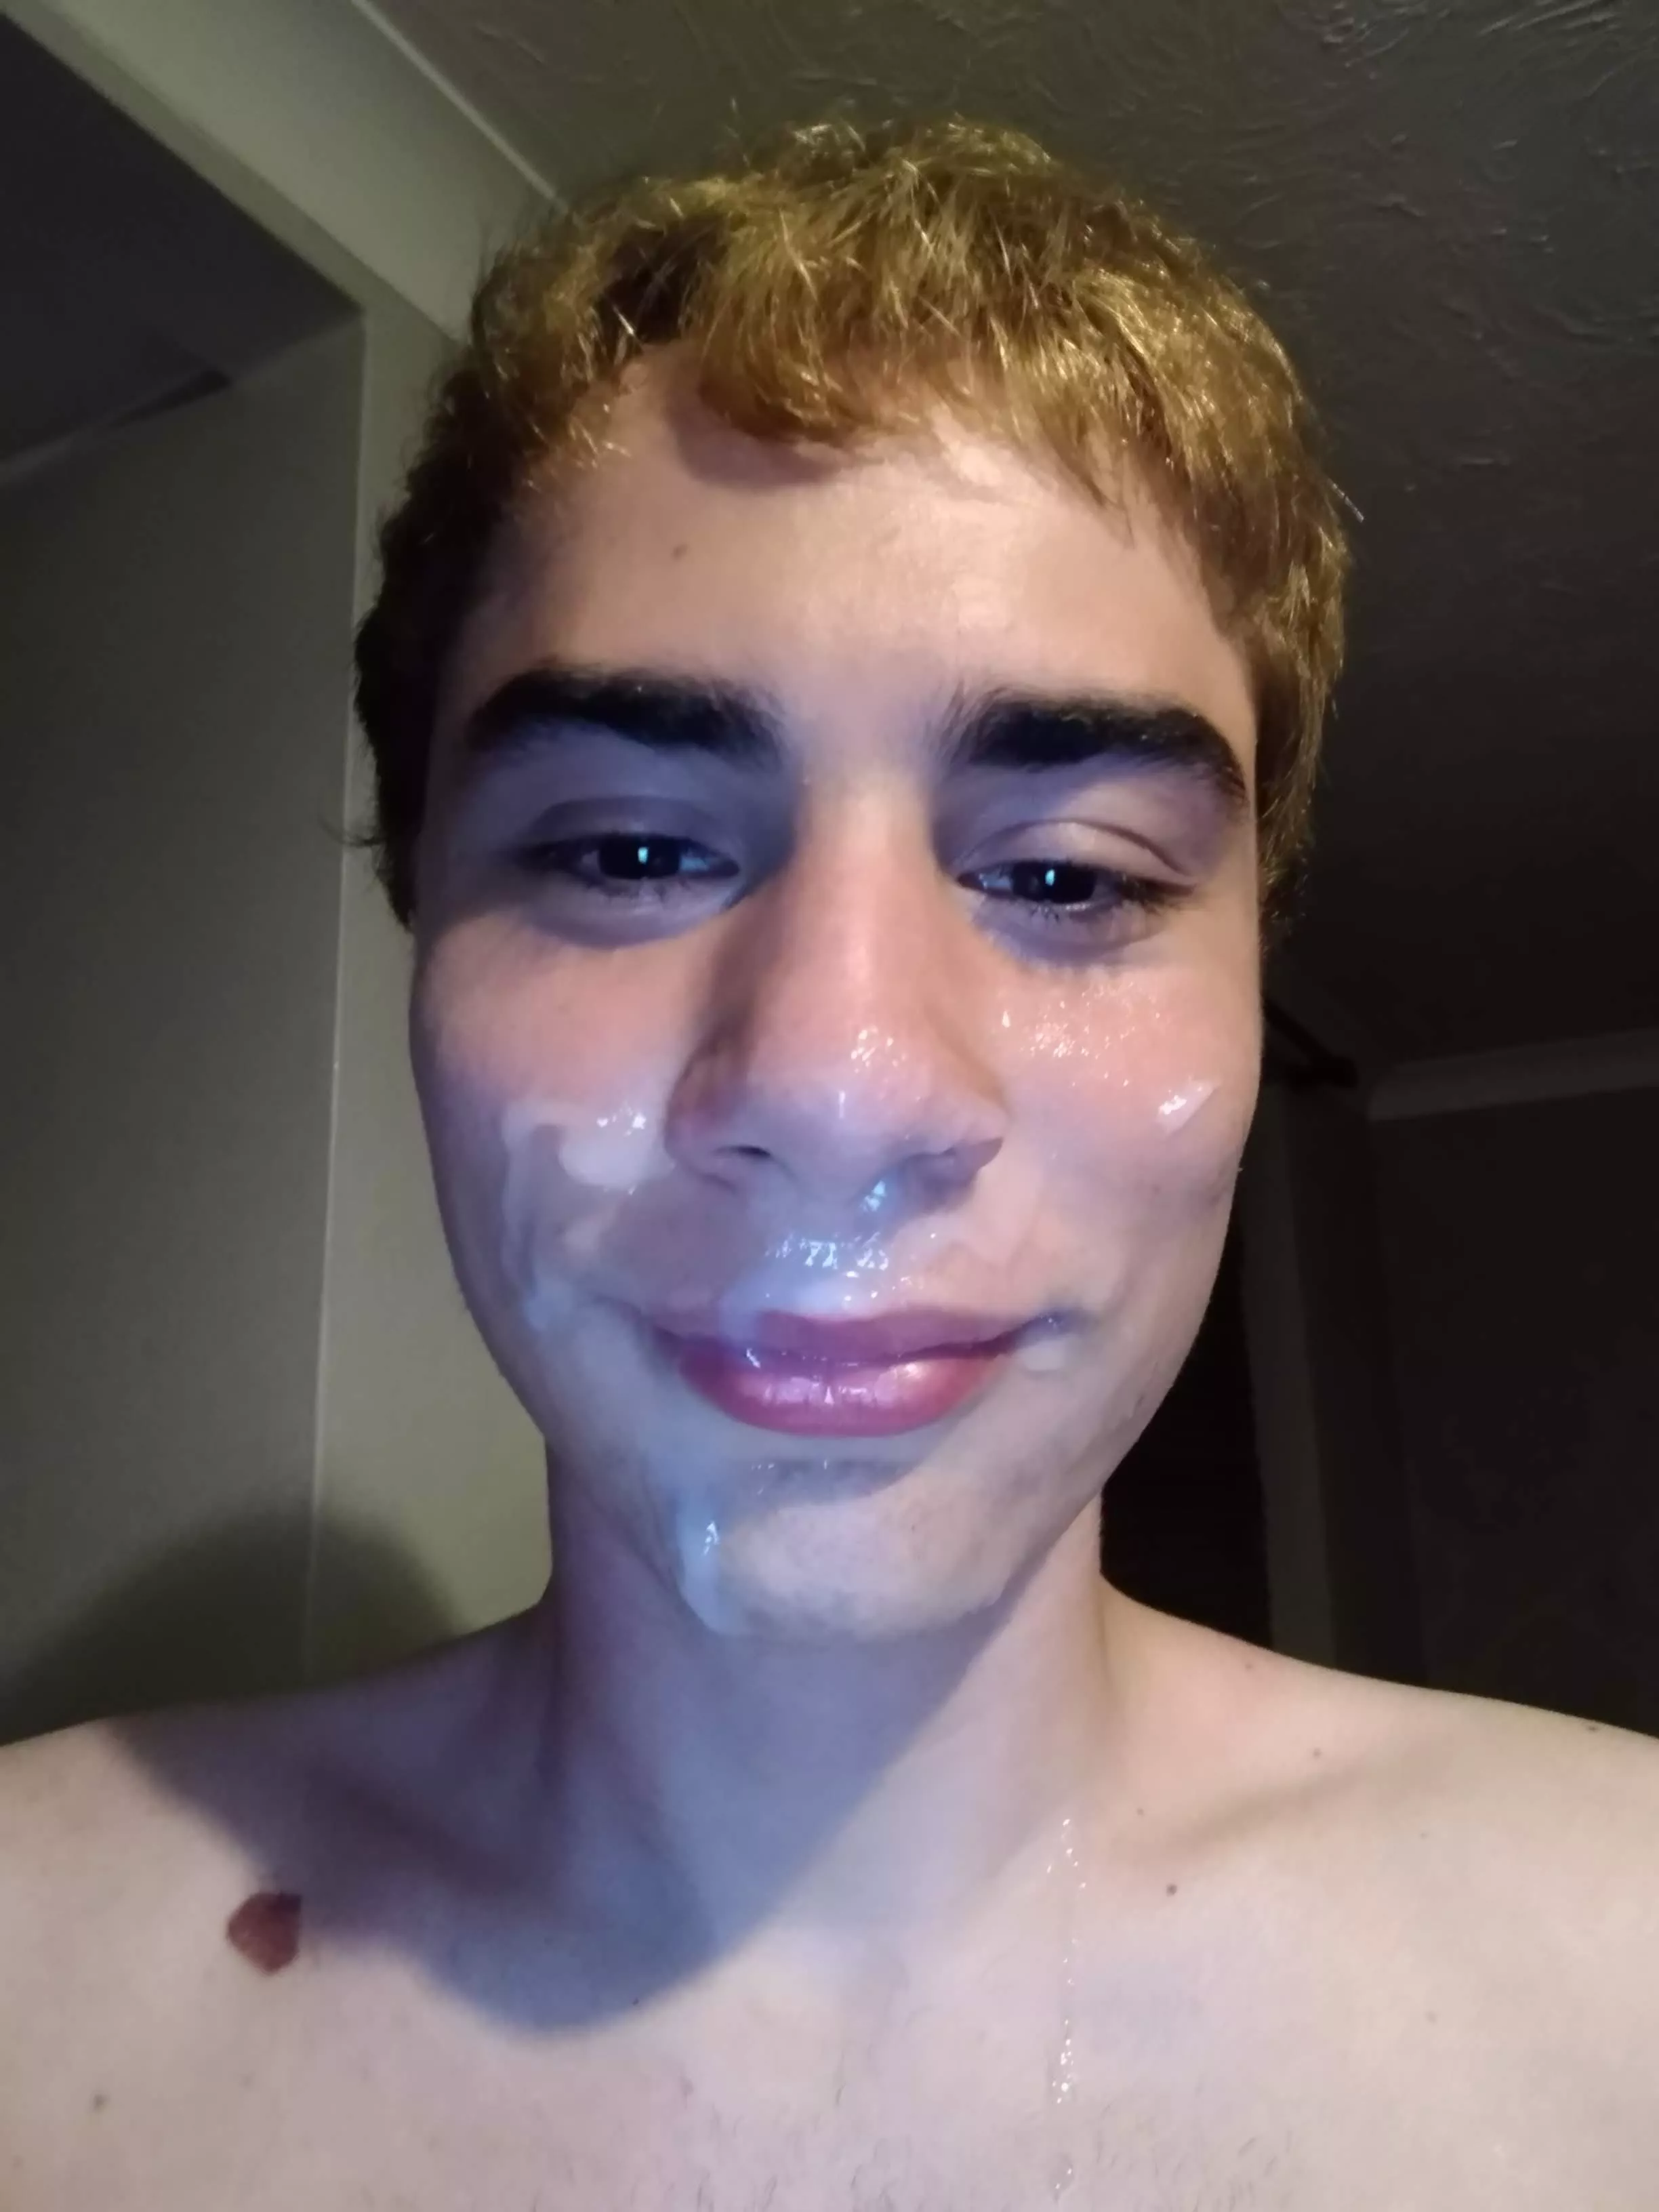 Guys With Cum On Their Face